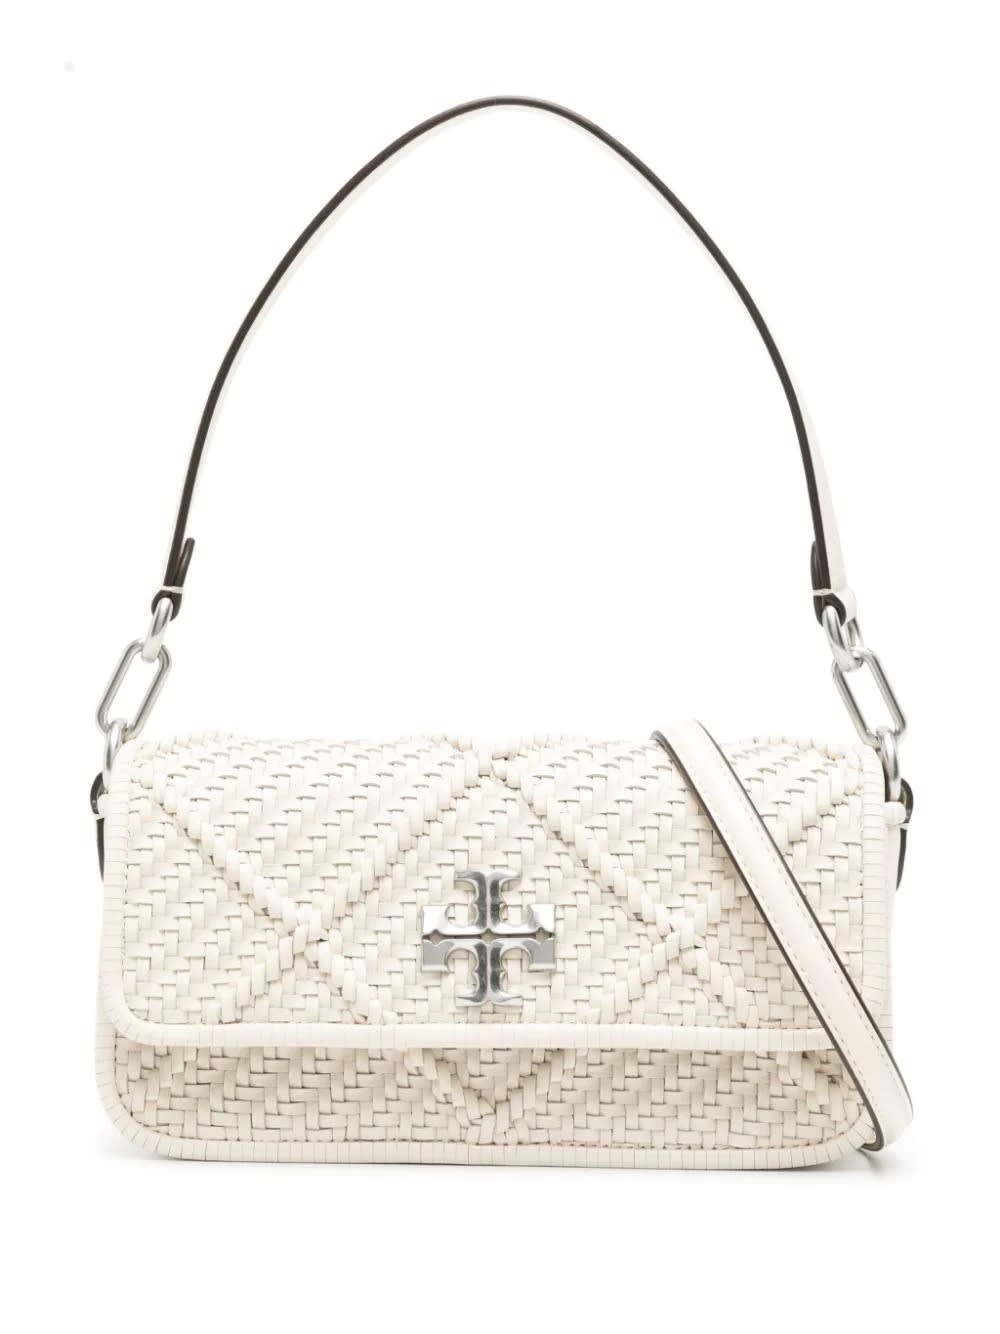 TORY BURCH NEW IVORY KIRA SMALL SHOULDER BAG WITH FLAP AND DIAMOND BRAID